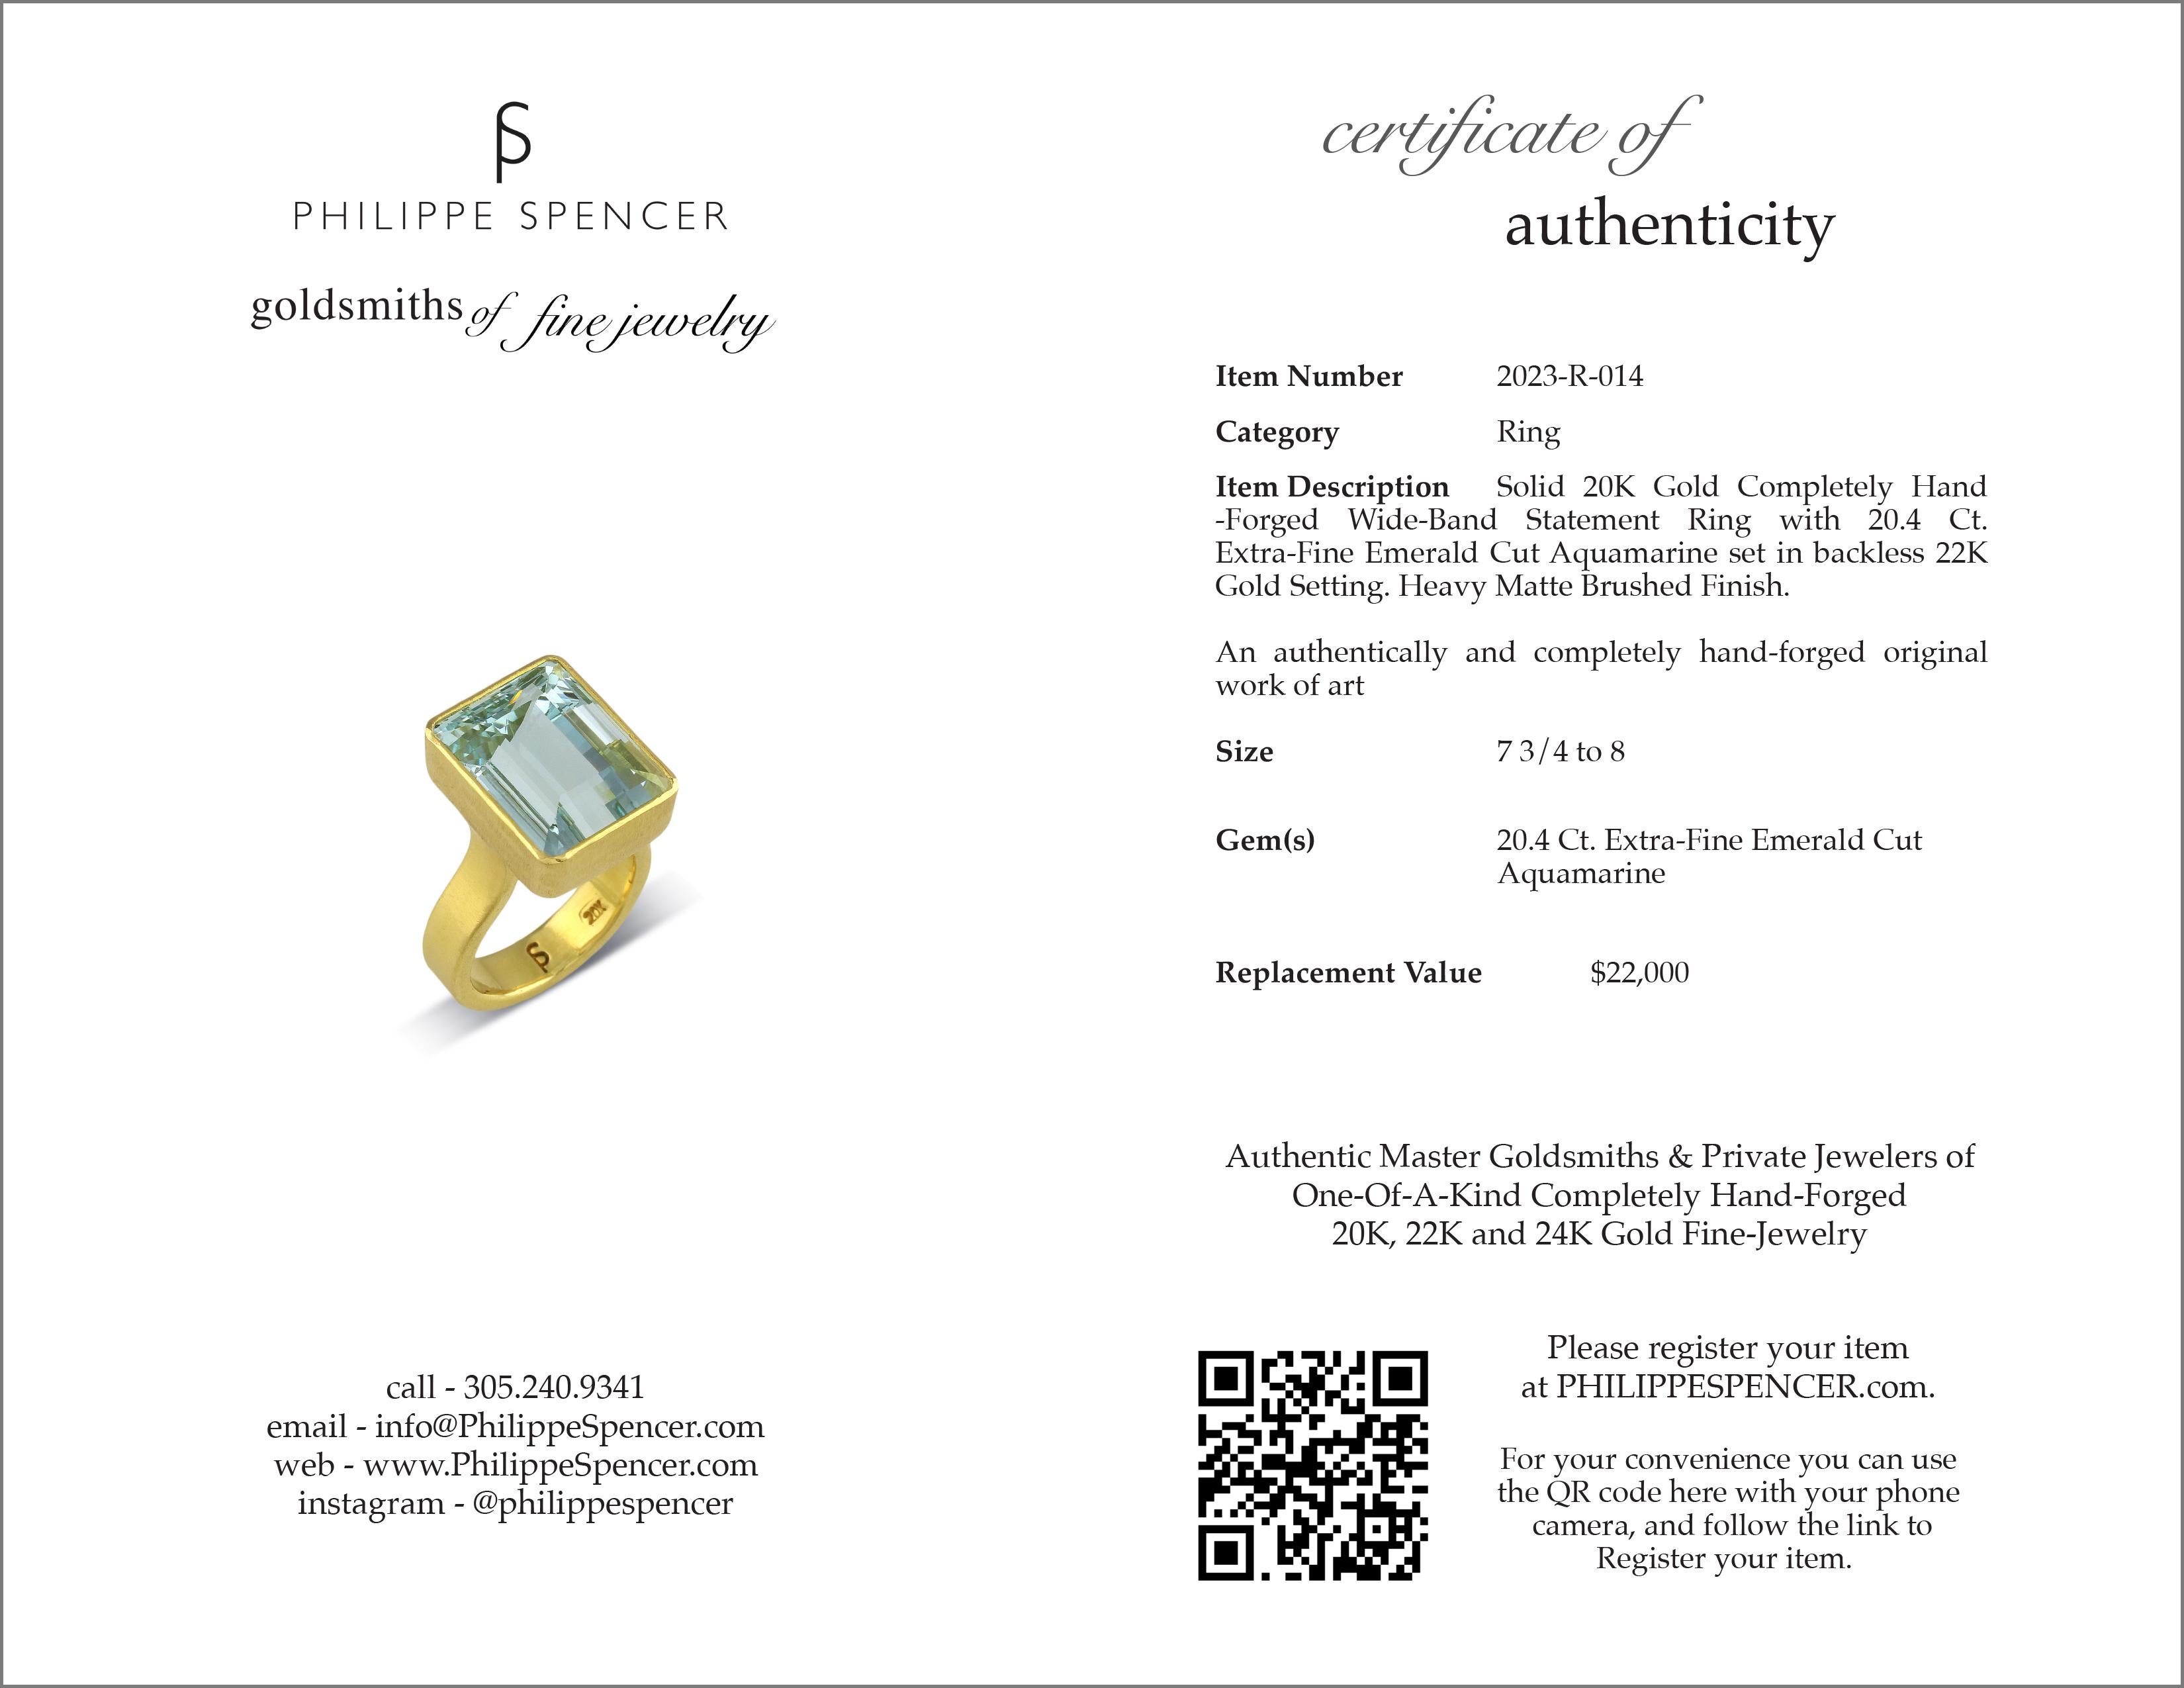 Women's PHILIPPE SPENCER 20.4 Ct. Extra-Fine Aquamarine in 22K & 20K Gold Statement Ring For Sale